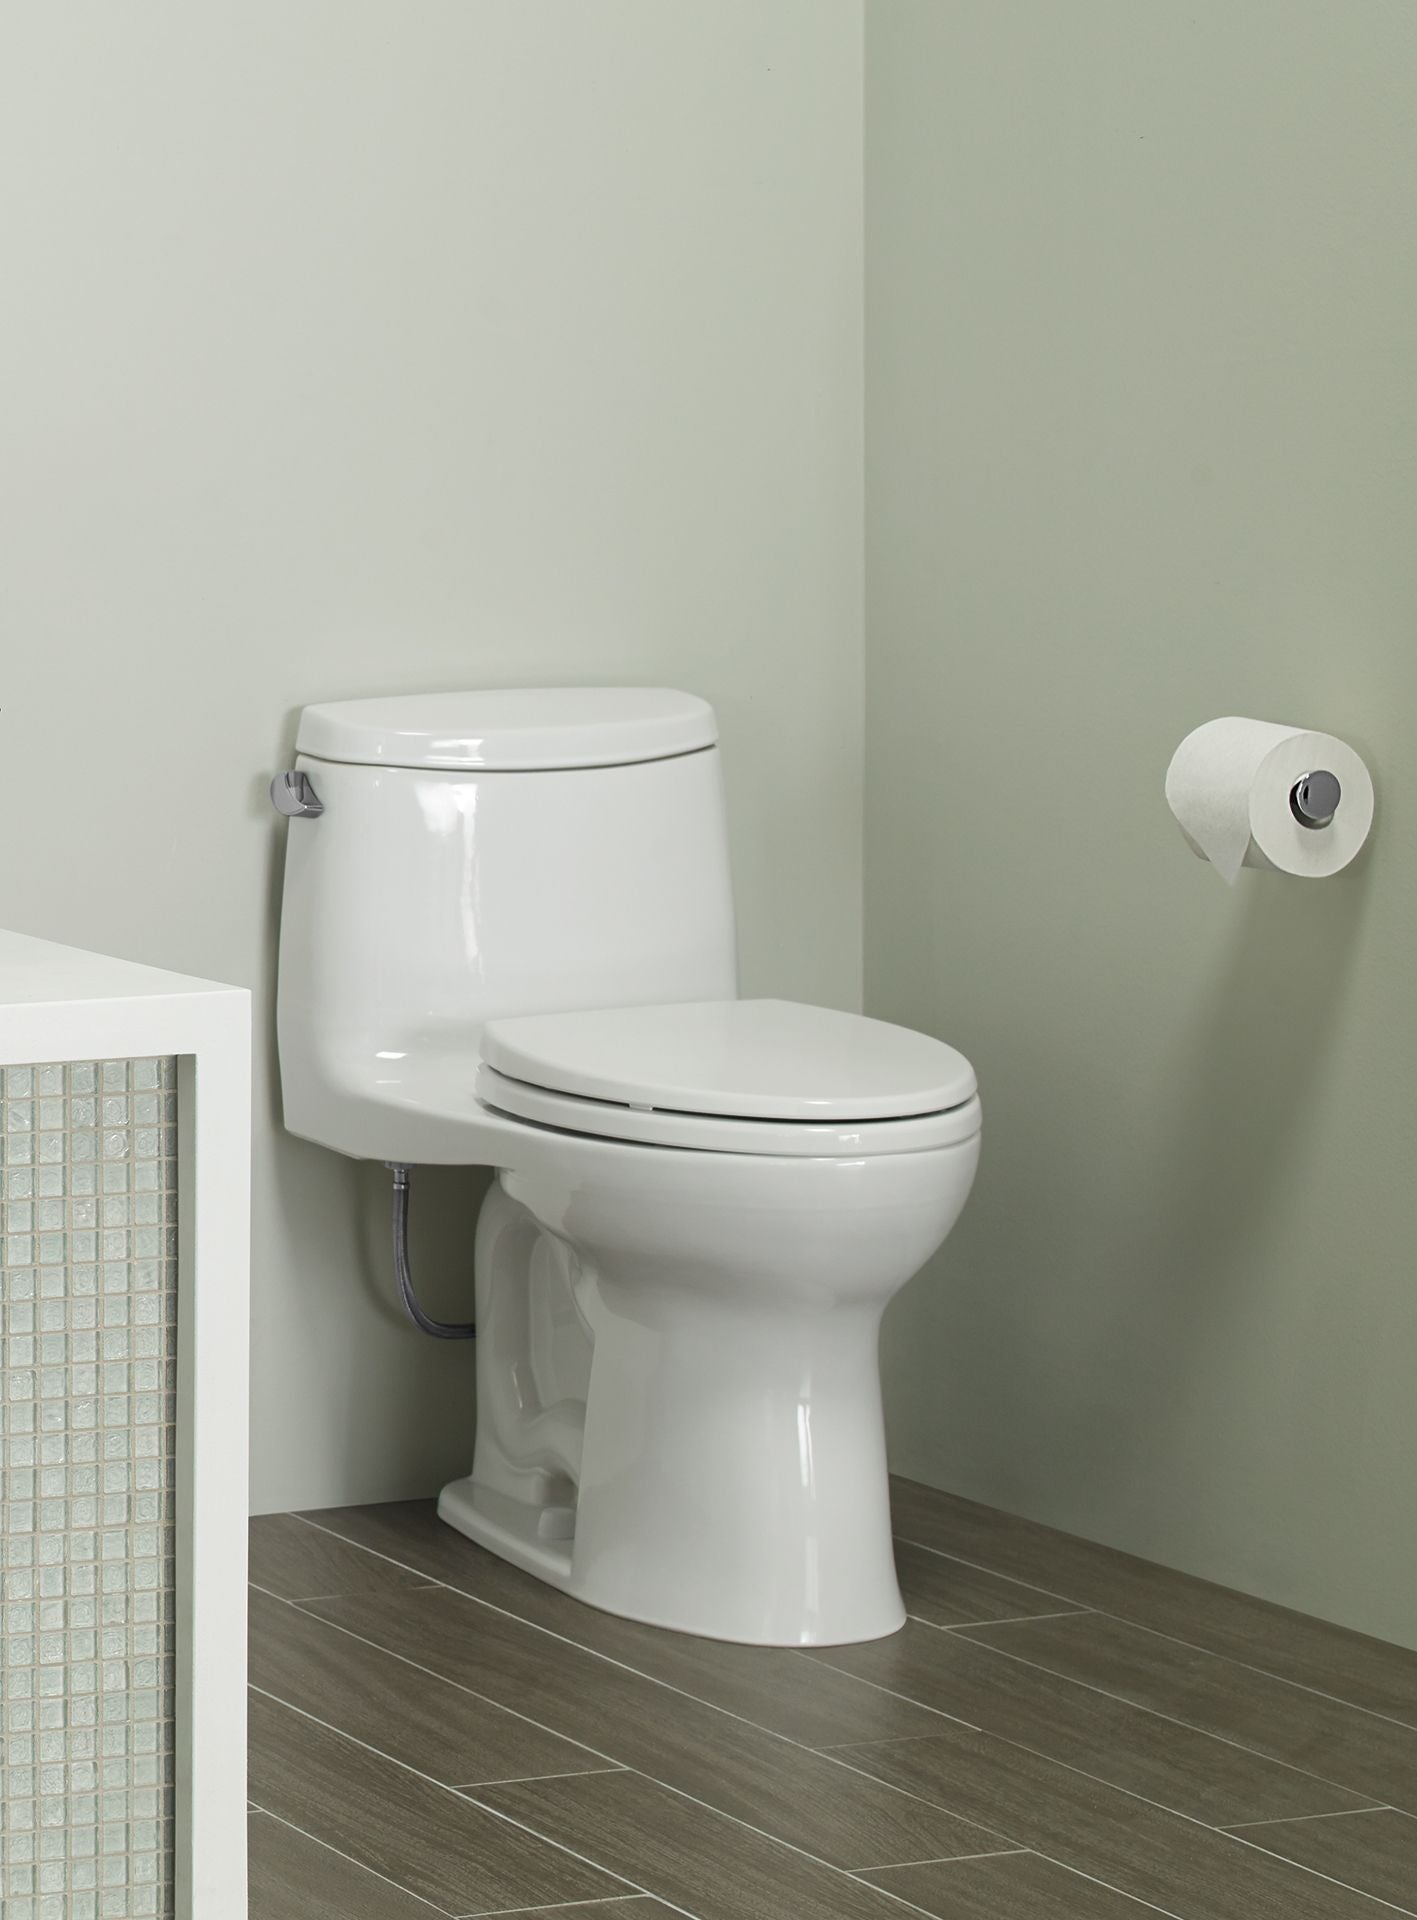 Ultramax II One-Piece Toilet, by Toto, Universal Height (ADA), Elongated Bowl, Tornado Flush, with Washlet Bidet Capability  MS604124CEFG#01